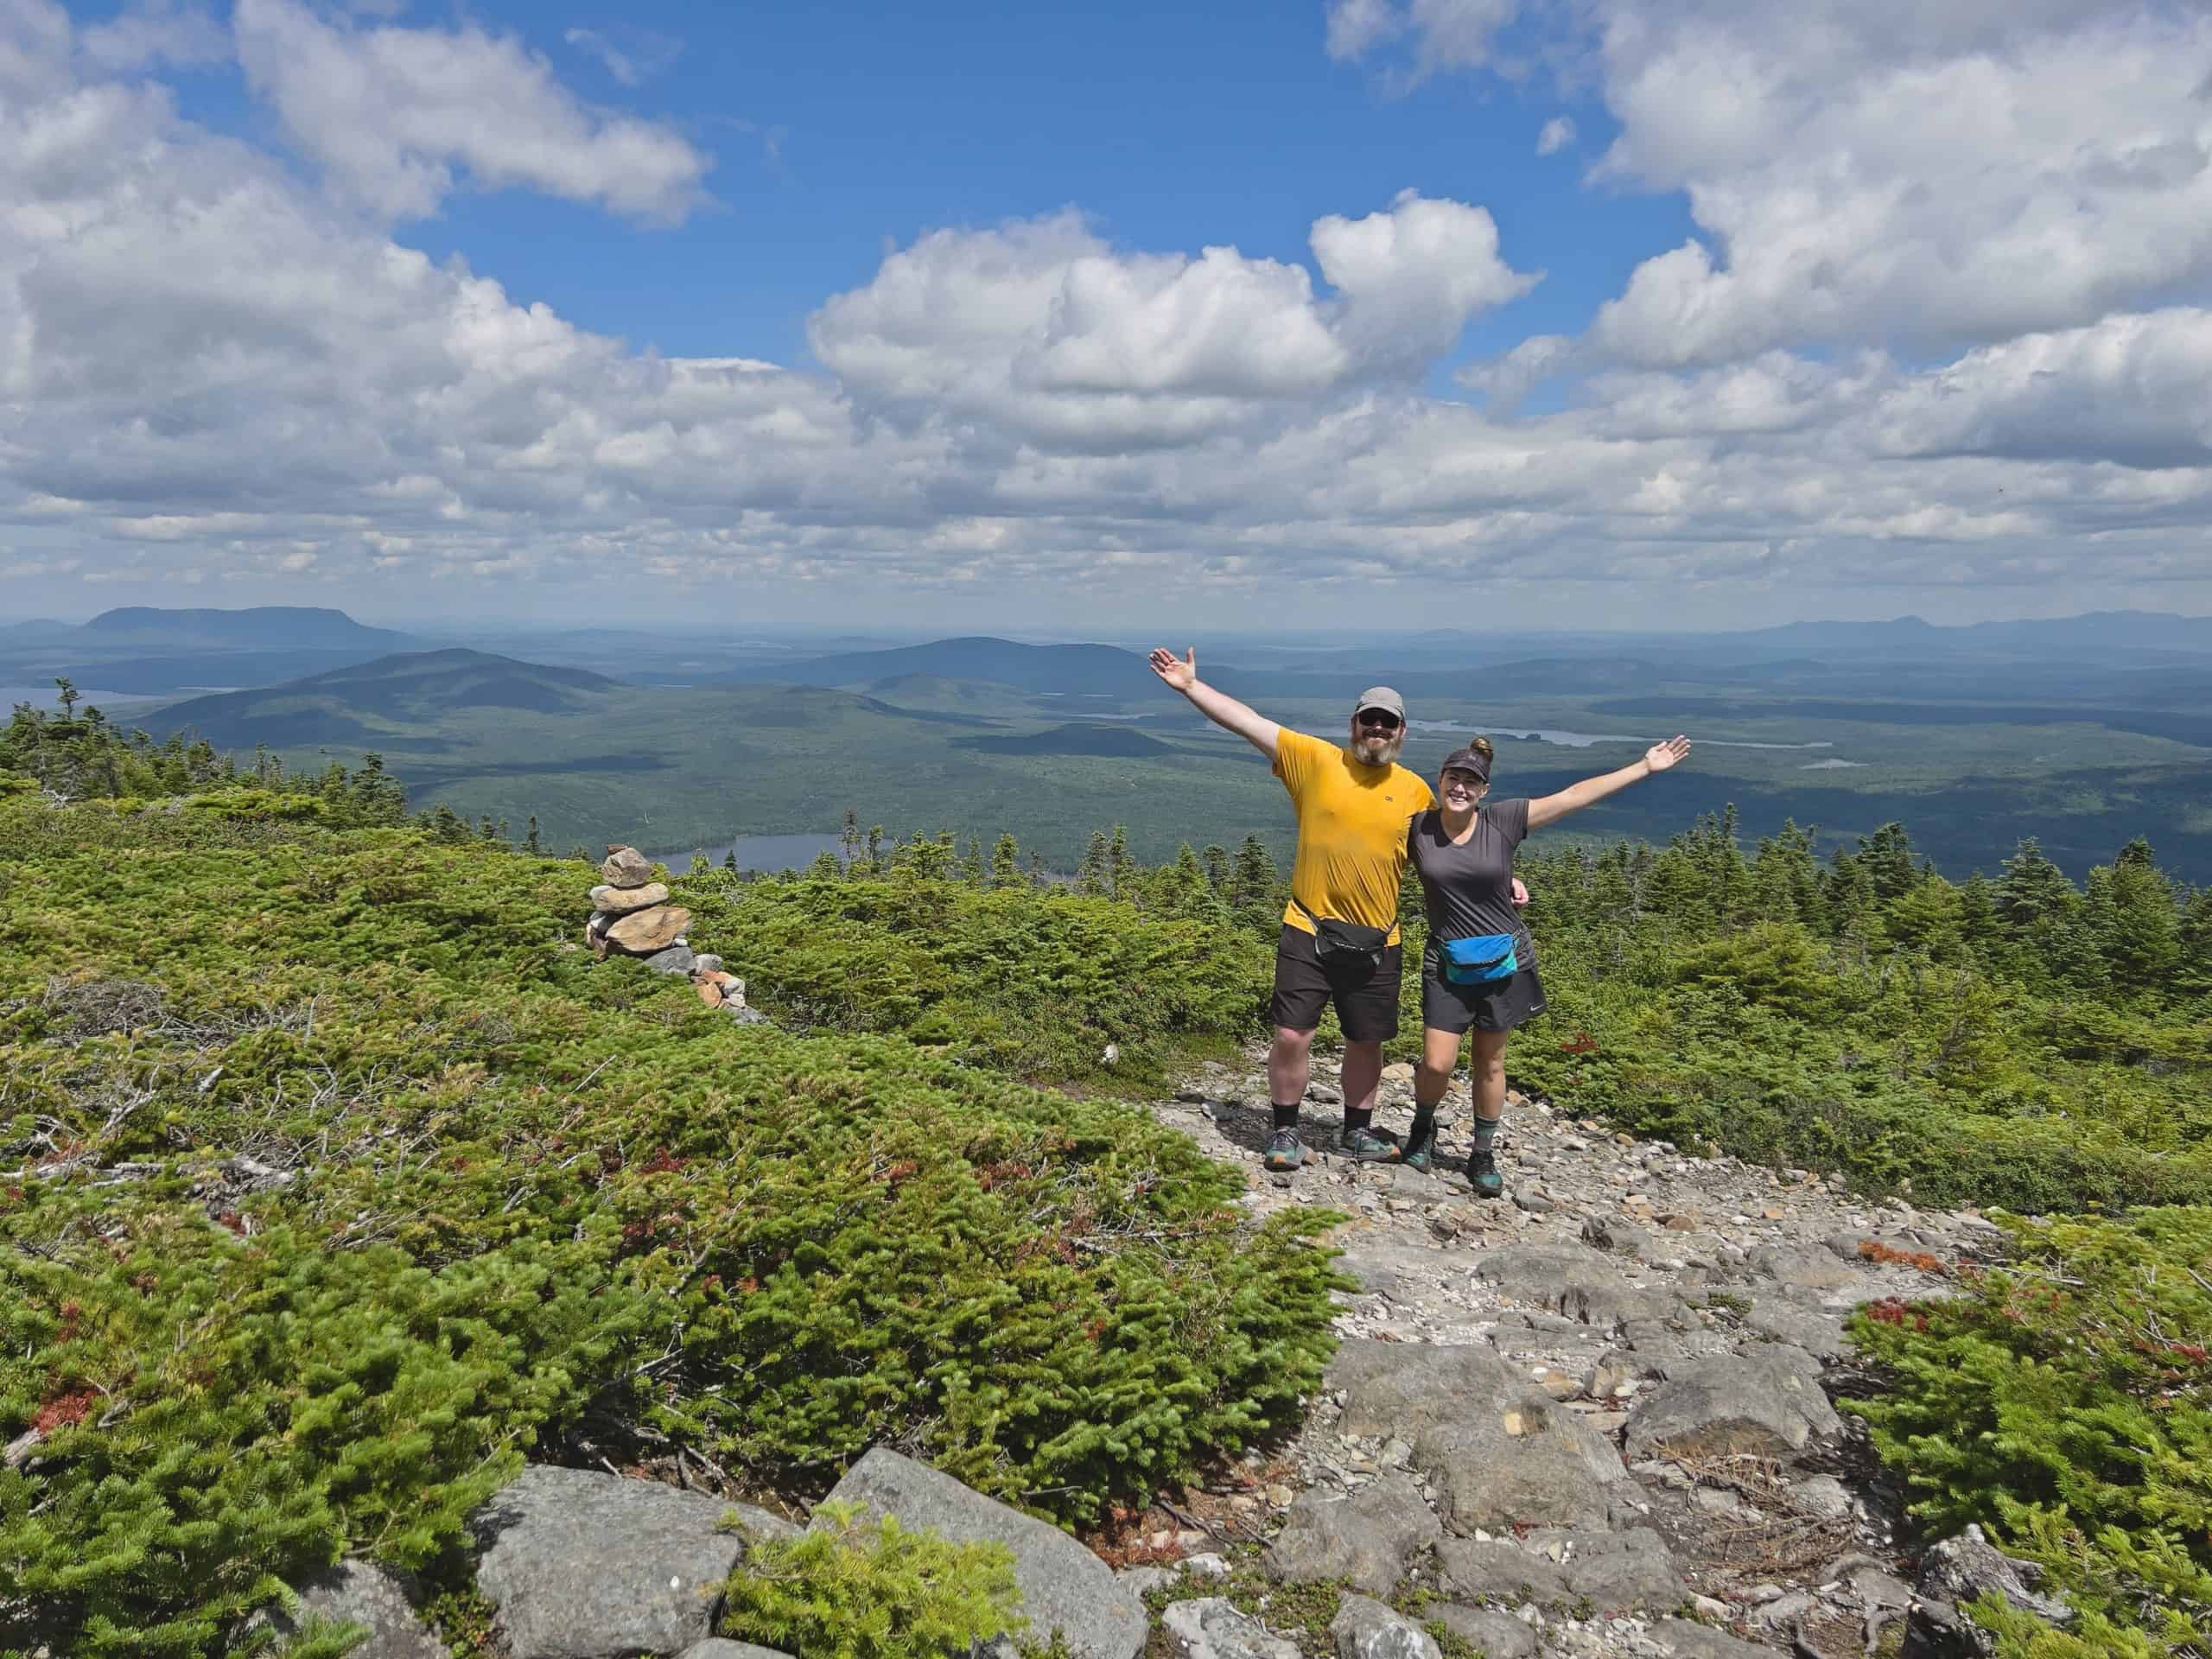 Cindy and Barrett are wearing OR Echo Hiker Shirts from the Appalachian Trail gear list